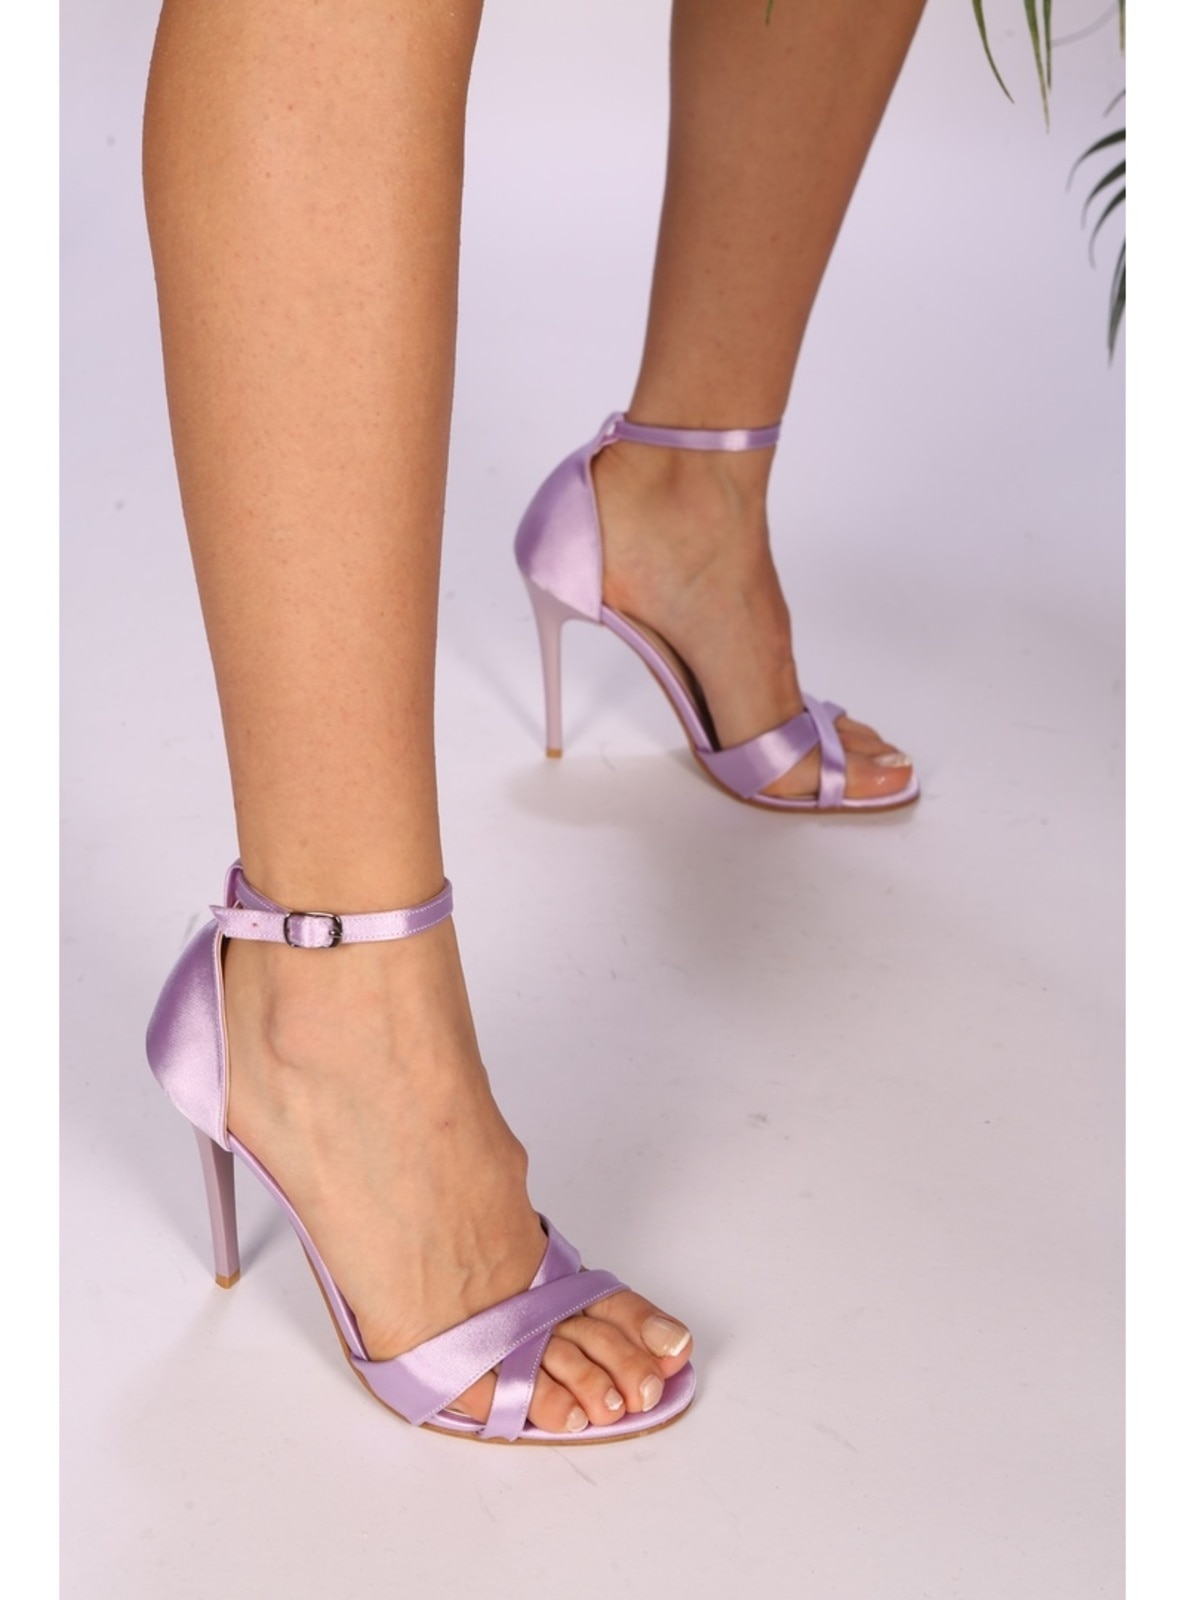 Lilac sandal - Lulus Search | Ankle strap high heels, Suede bow, Heels